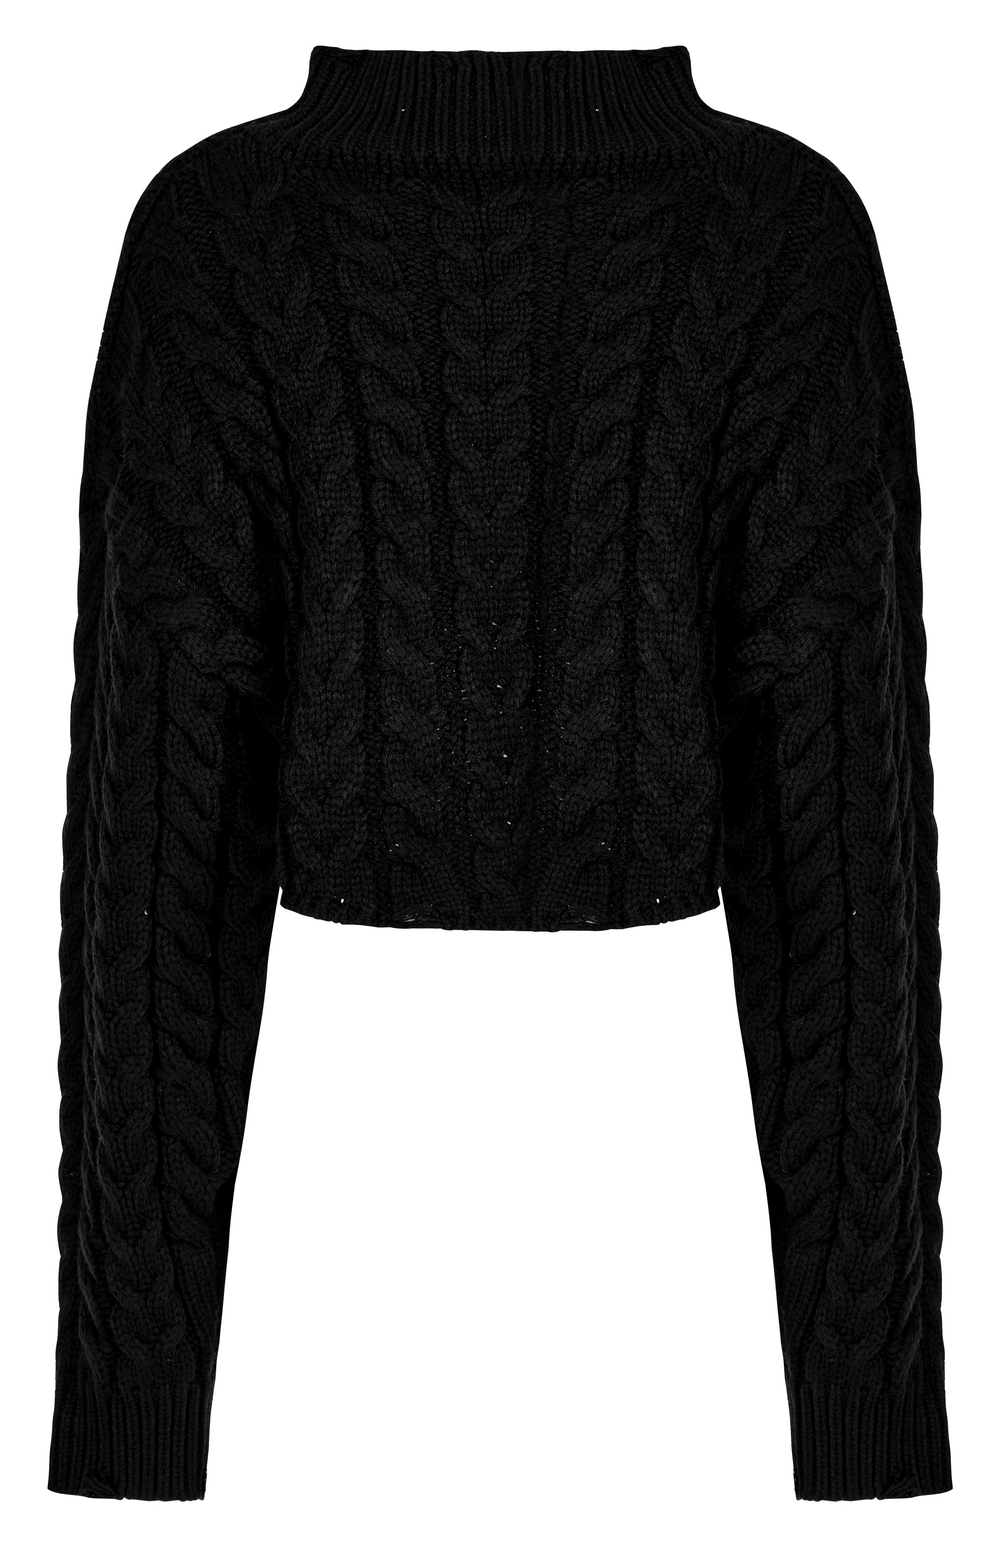 Chic Cropped Knit Turtleneck Sweater for Women